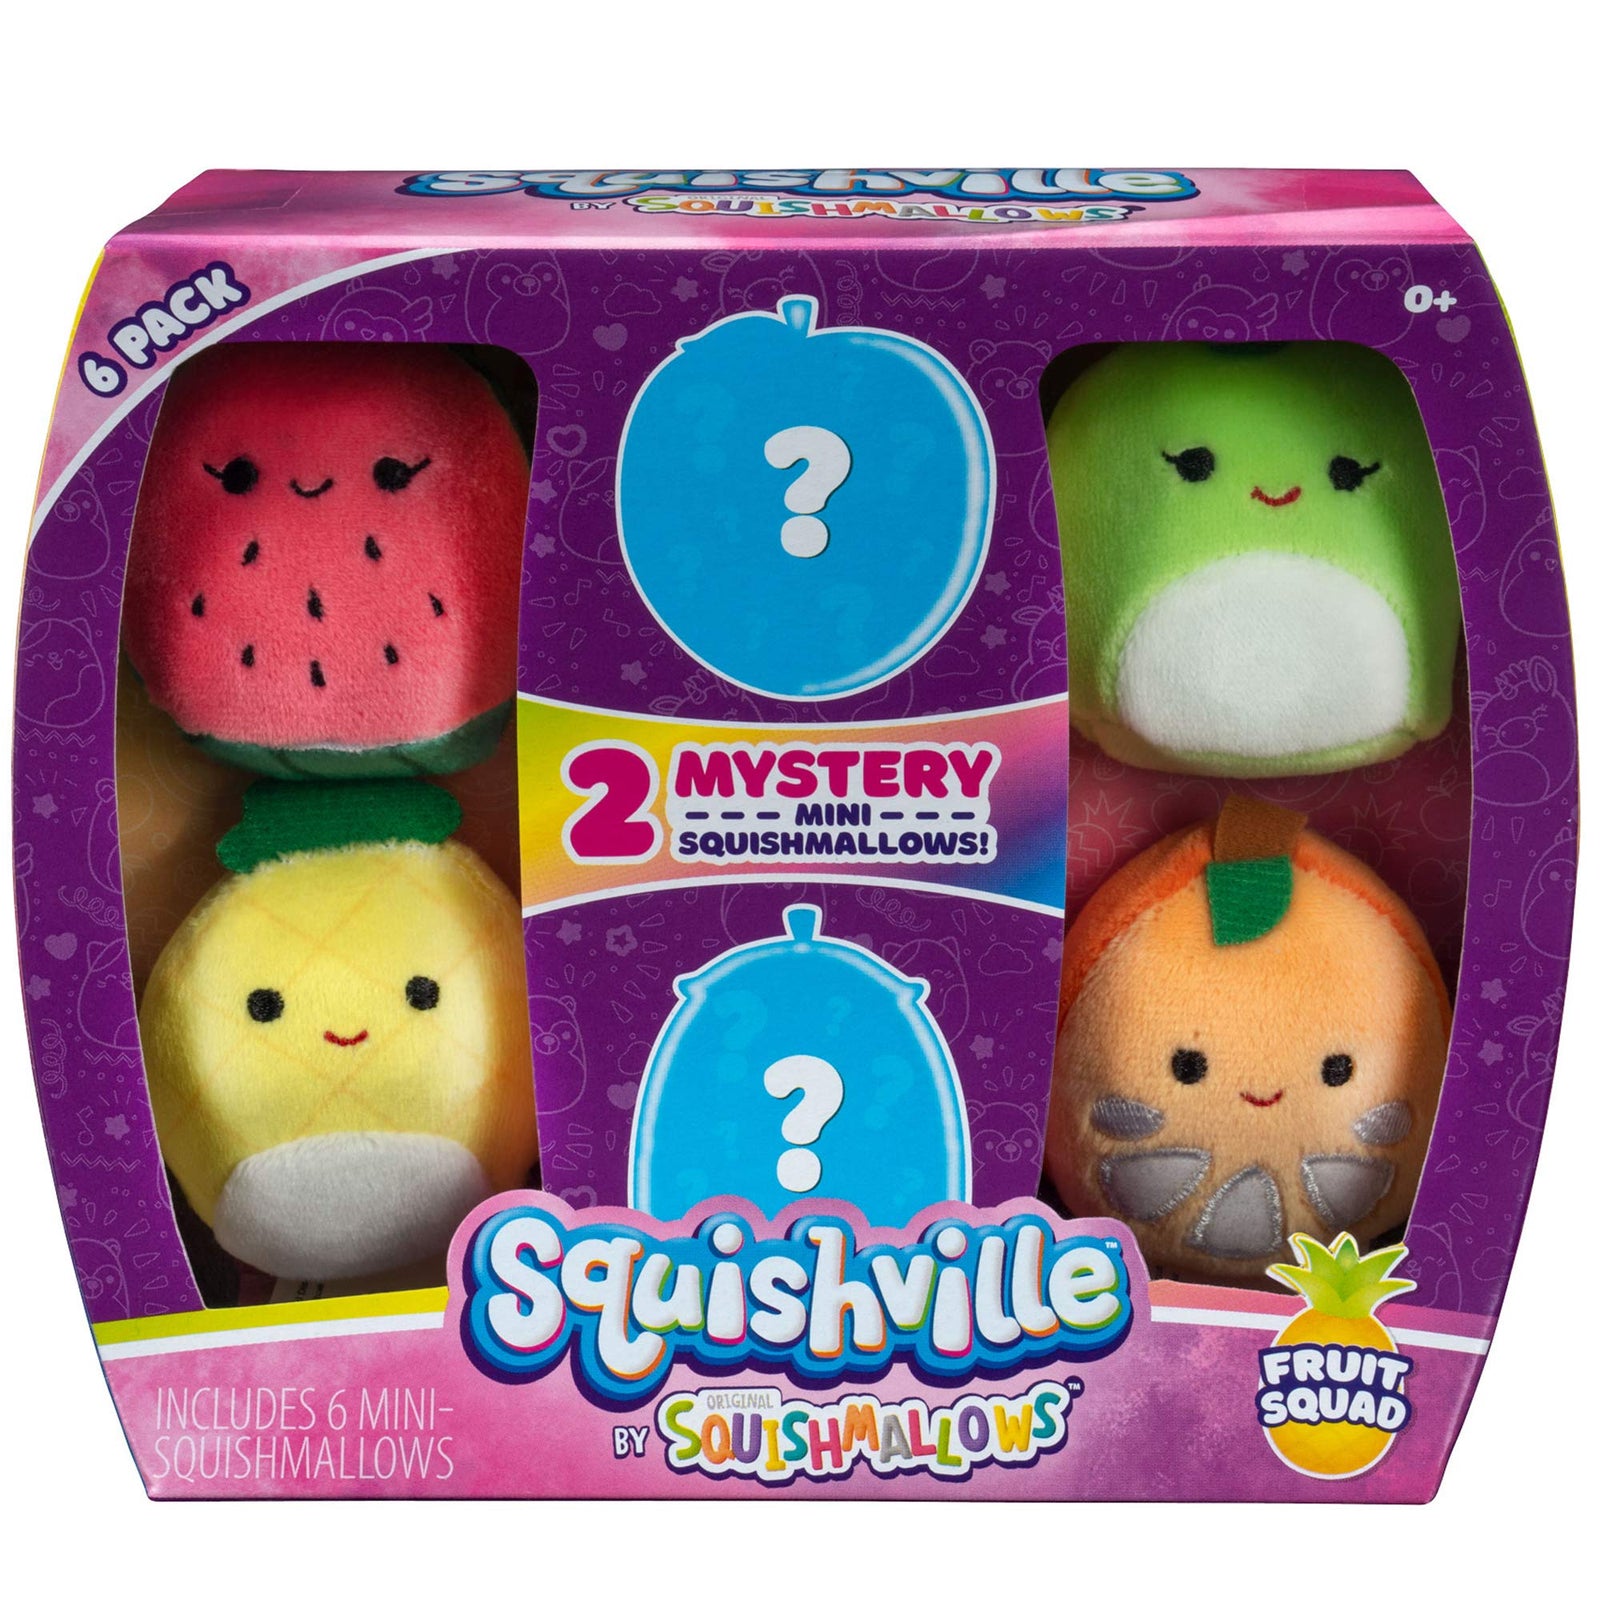 Squishville by Squishmallows Mini Plush Fruit Squad, Six 2” Soft Minimallow Fruit Plush, Irresistibly Soft Colorful Fruits, Mini Peach, Pineapple, and Watermelon Squishmallows